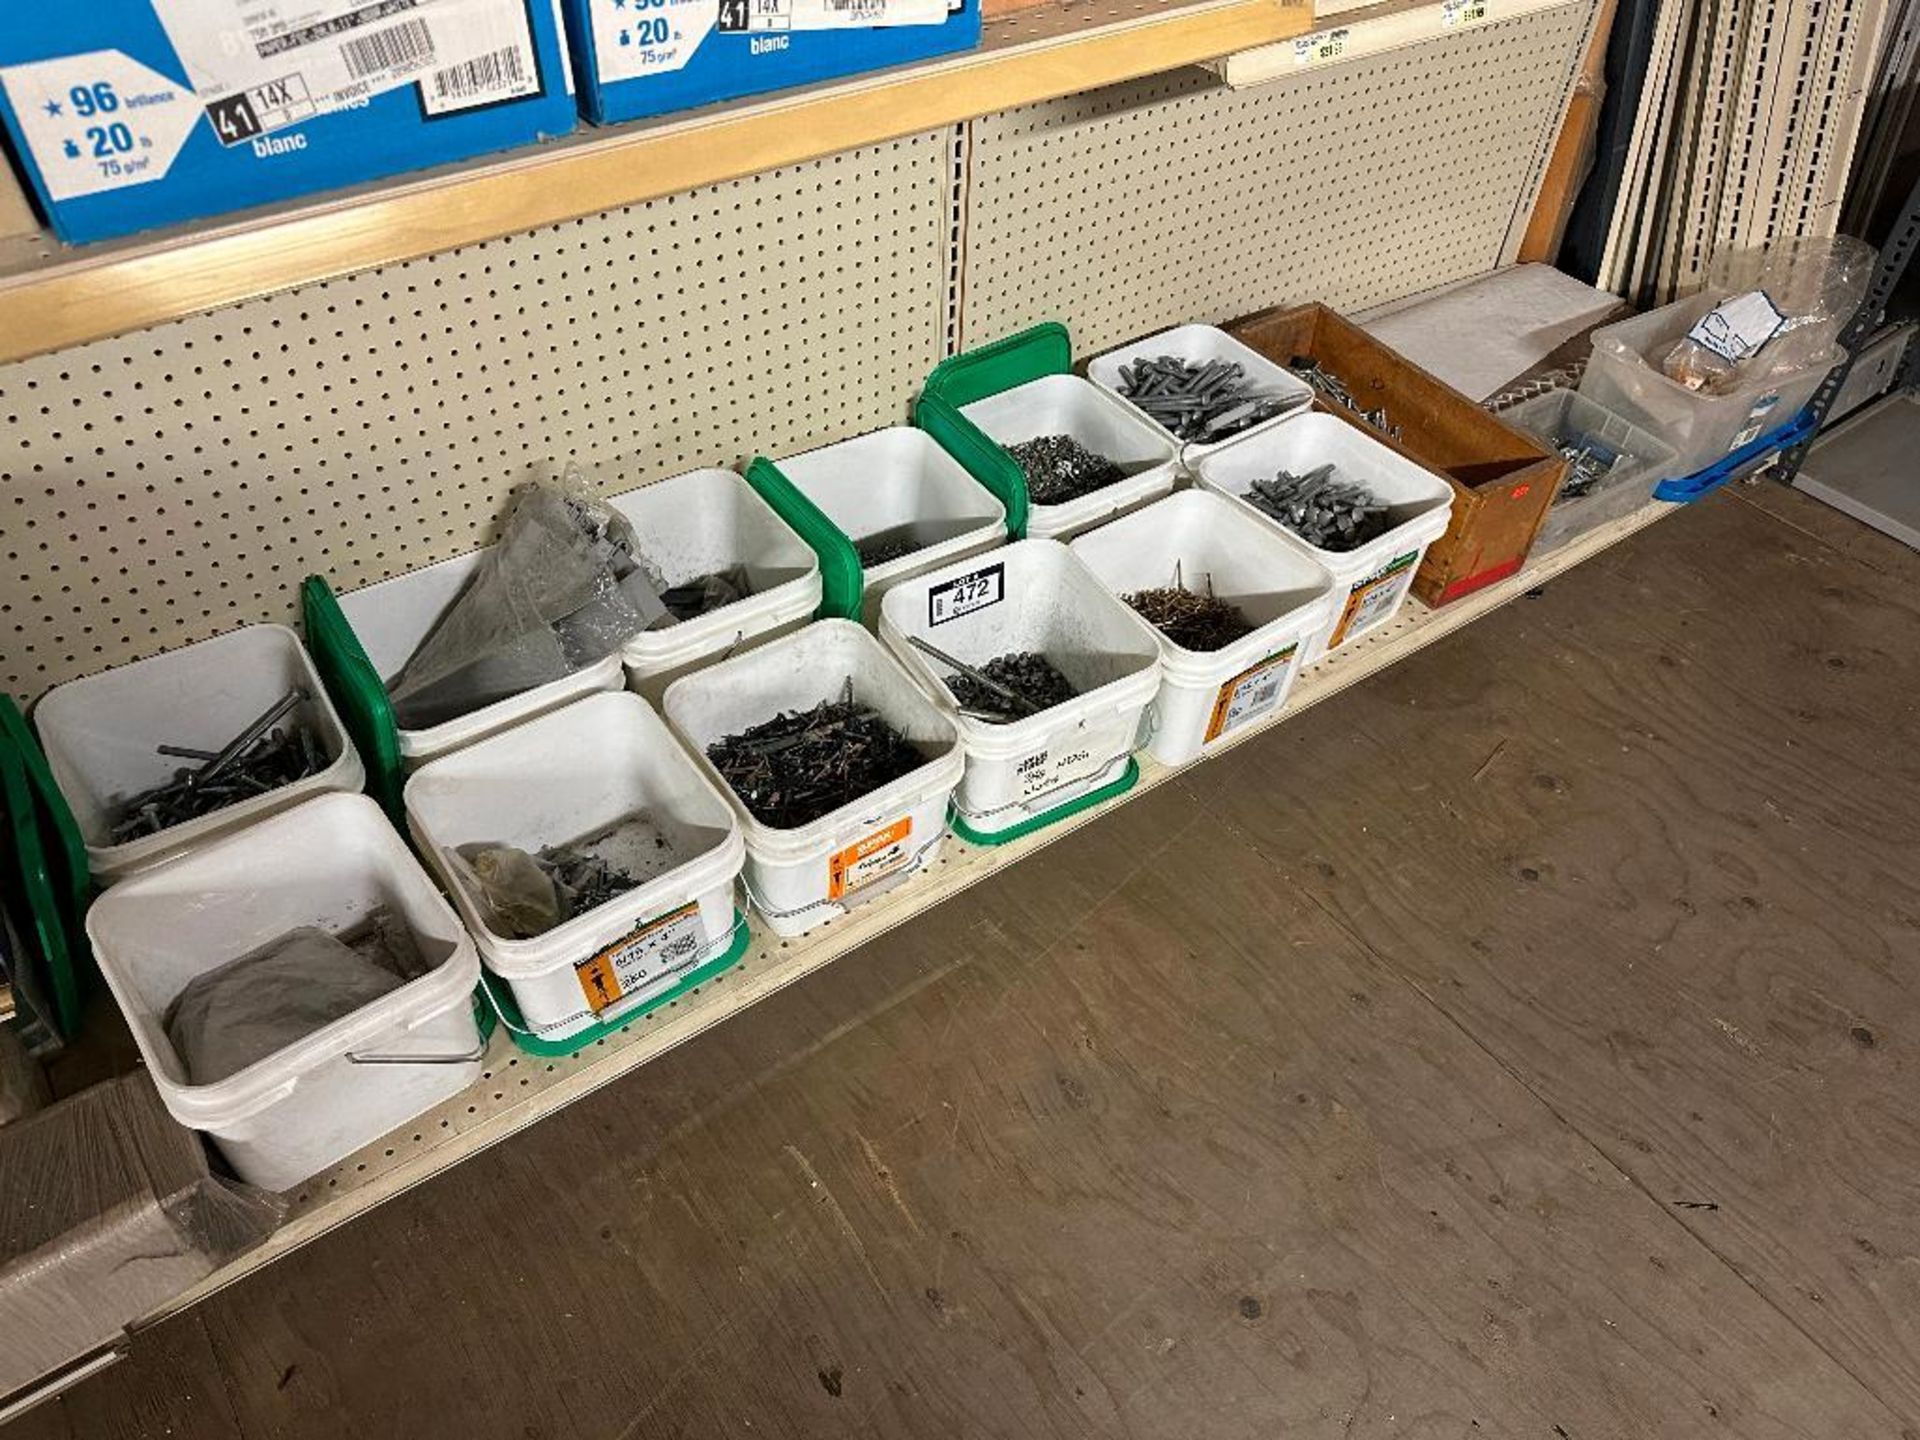 Lot of Asst. Fasteners including Screws, Nuts, Bolts, Nails, etc.